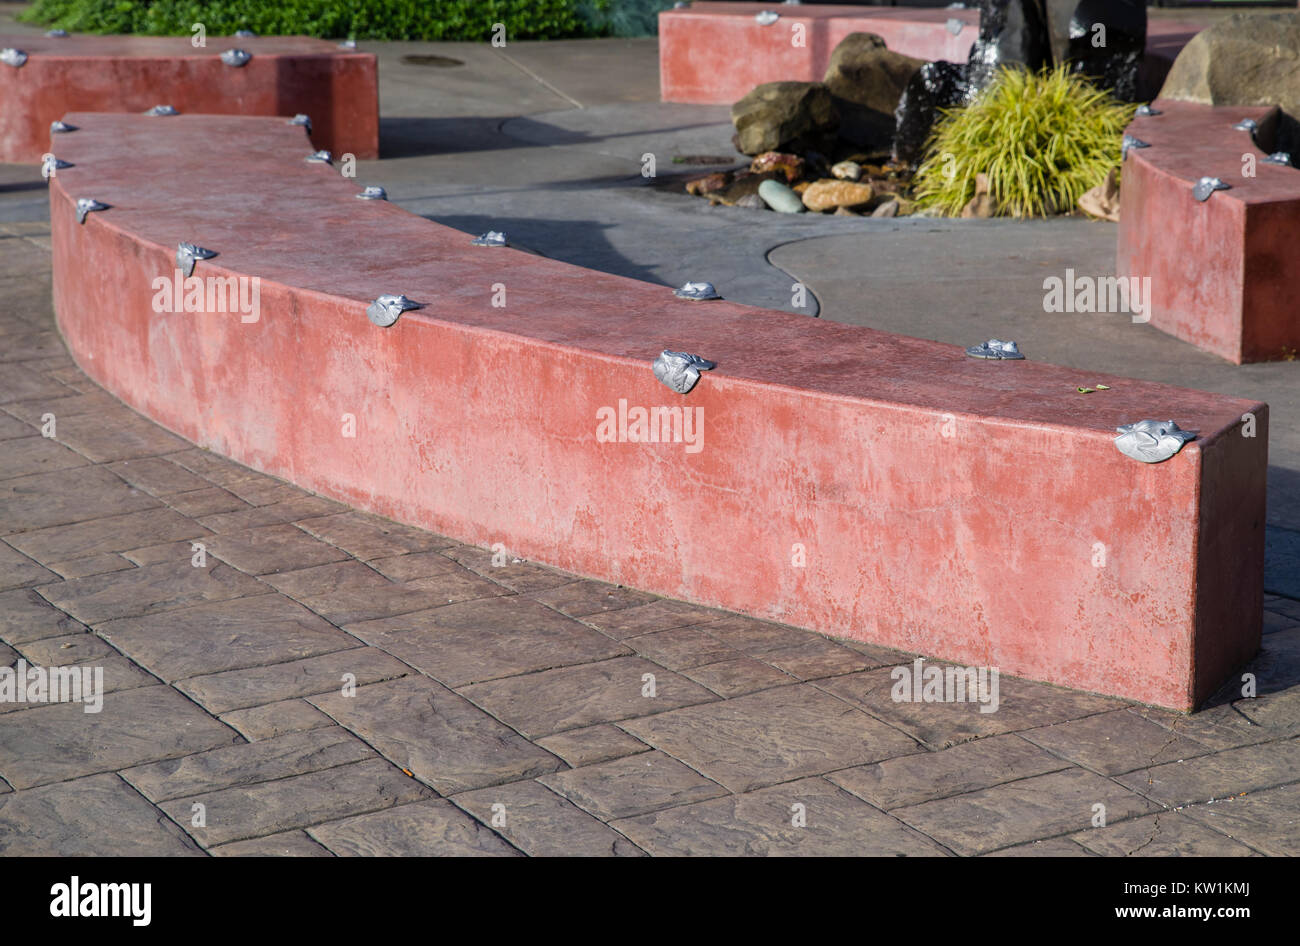 Concrete wall or bench with anti-skate deterrent devices installed Stock Photo